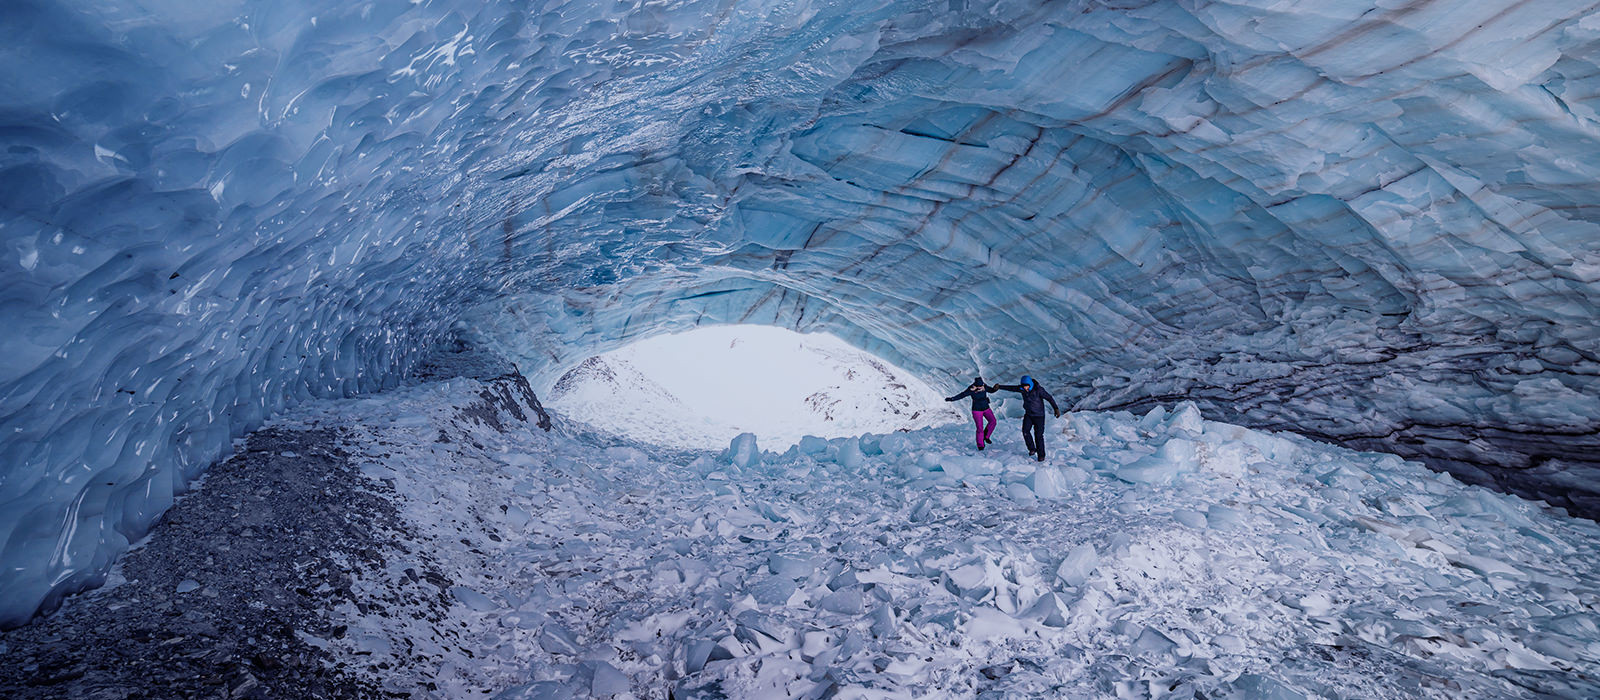 A couple walking inside a cave filled with ice